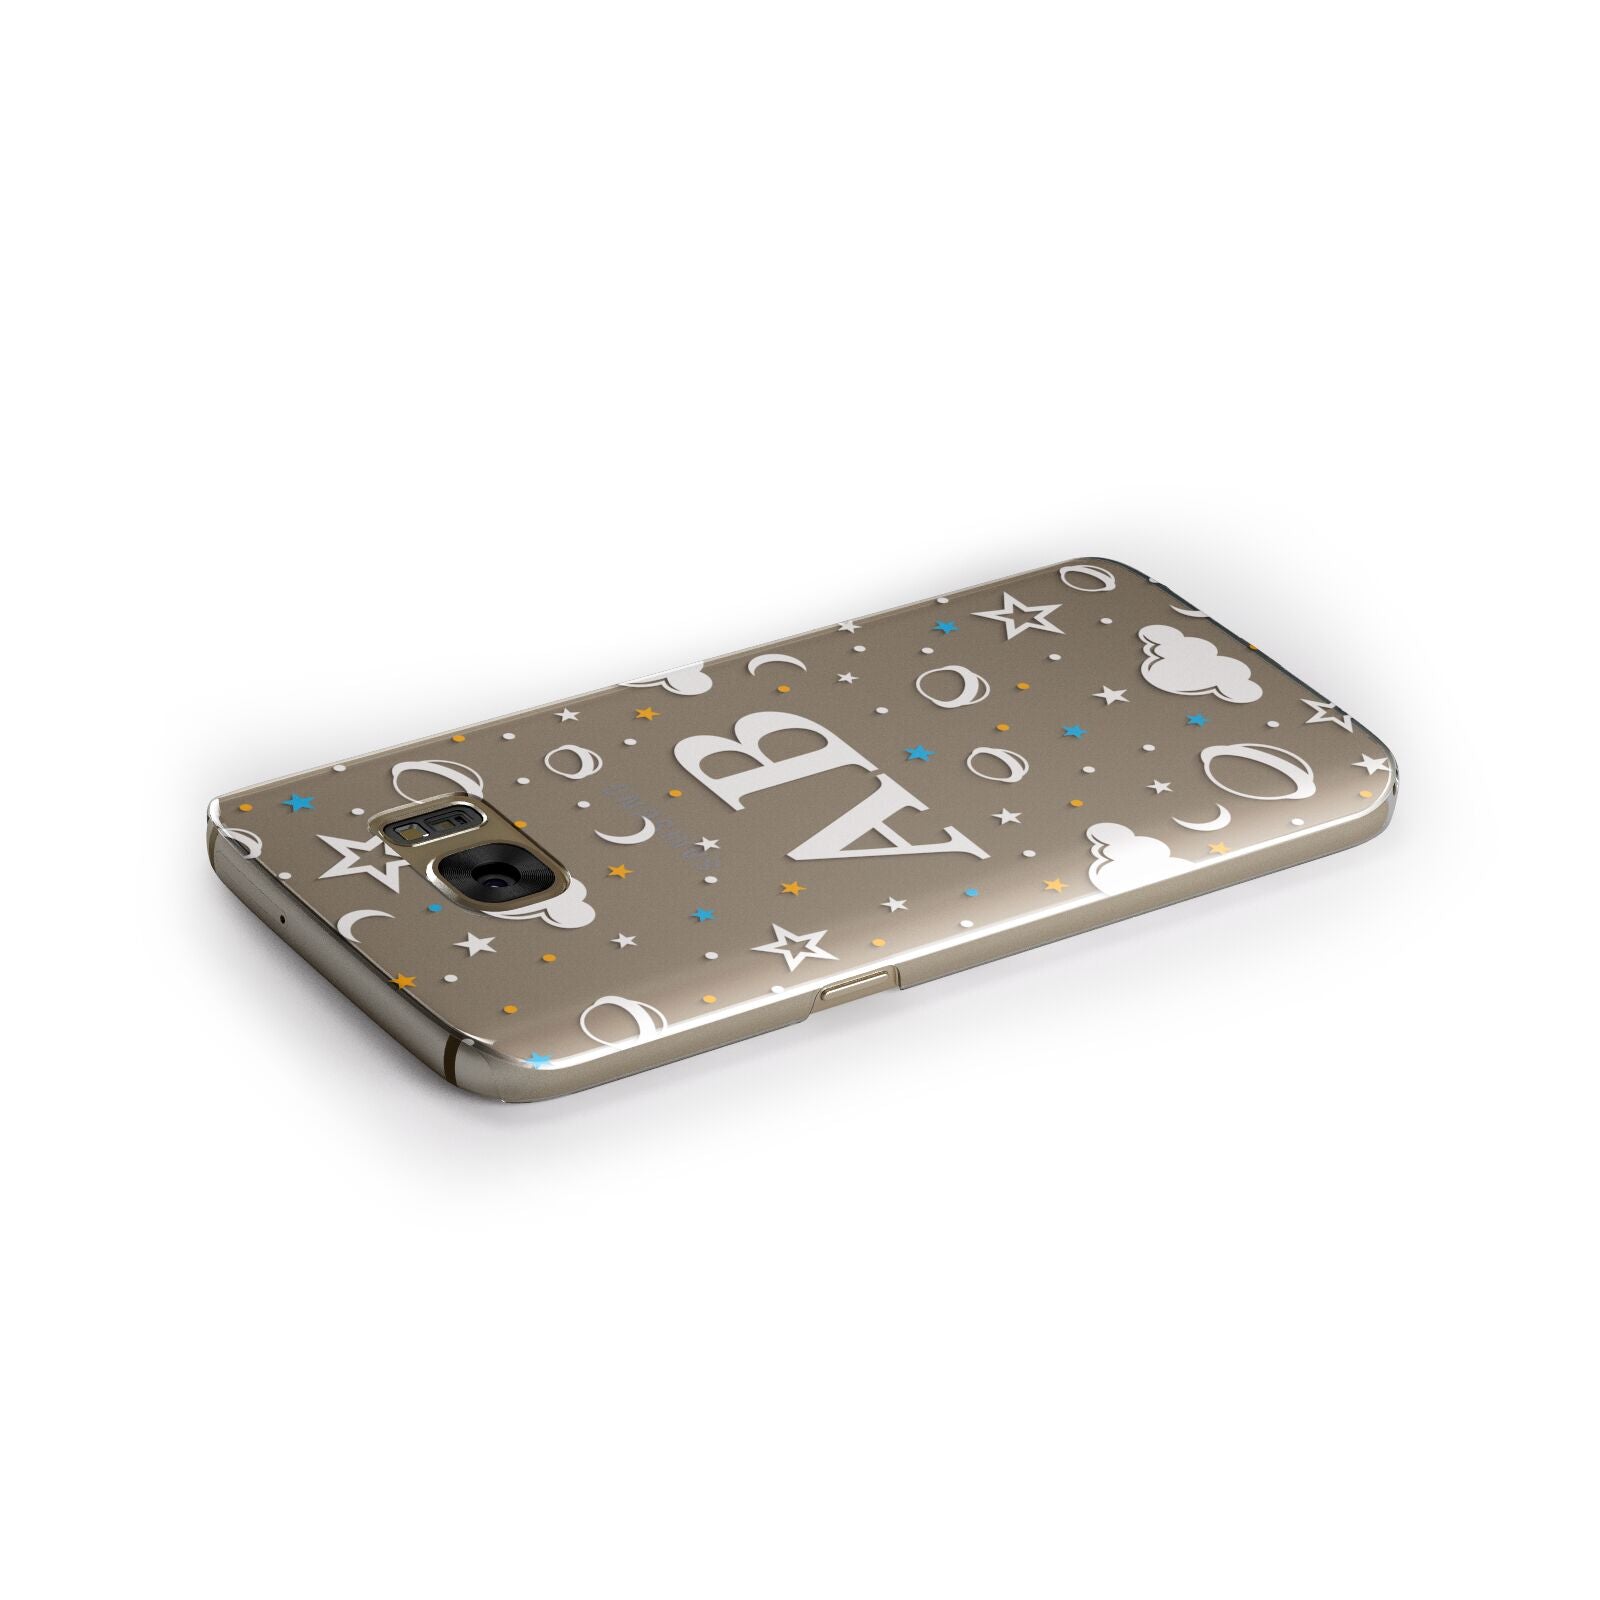 Astronomical Initials Samsung Galaxy Case Side Close Up